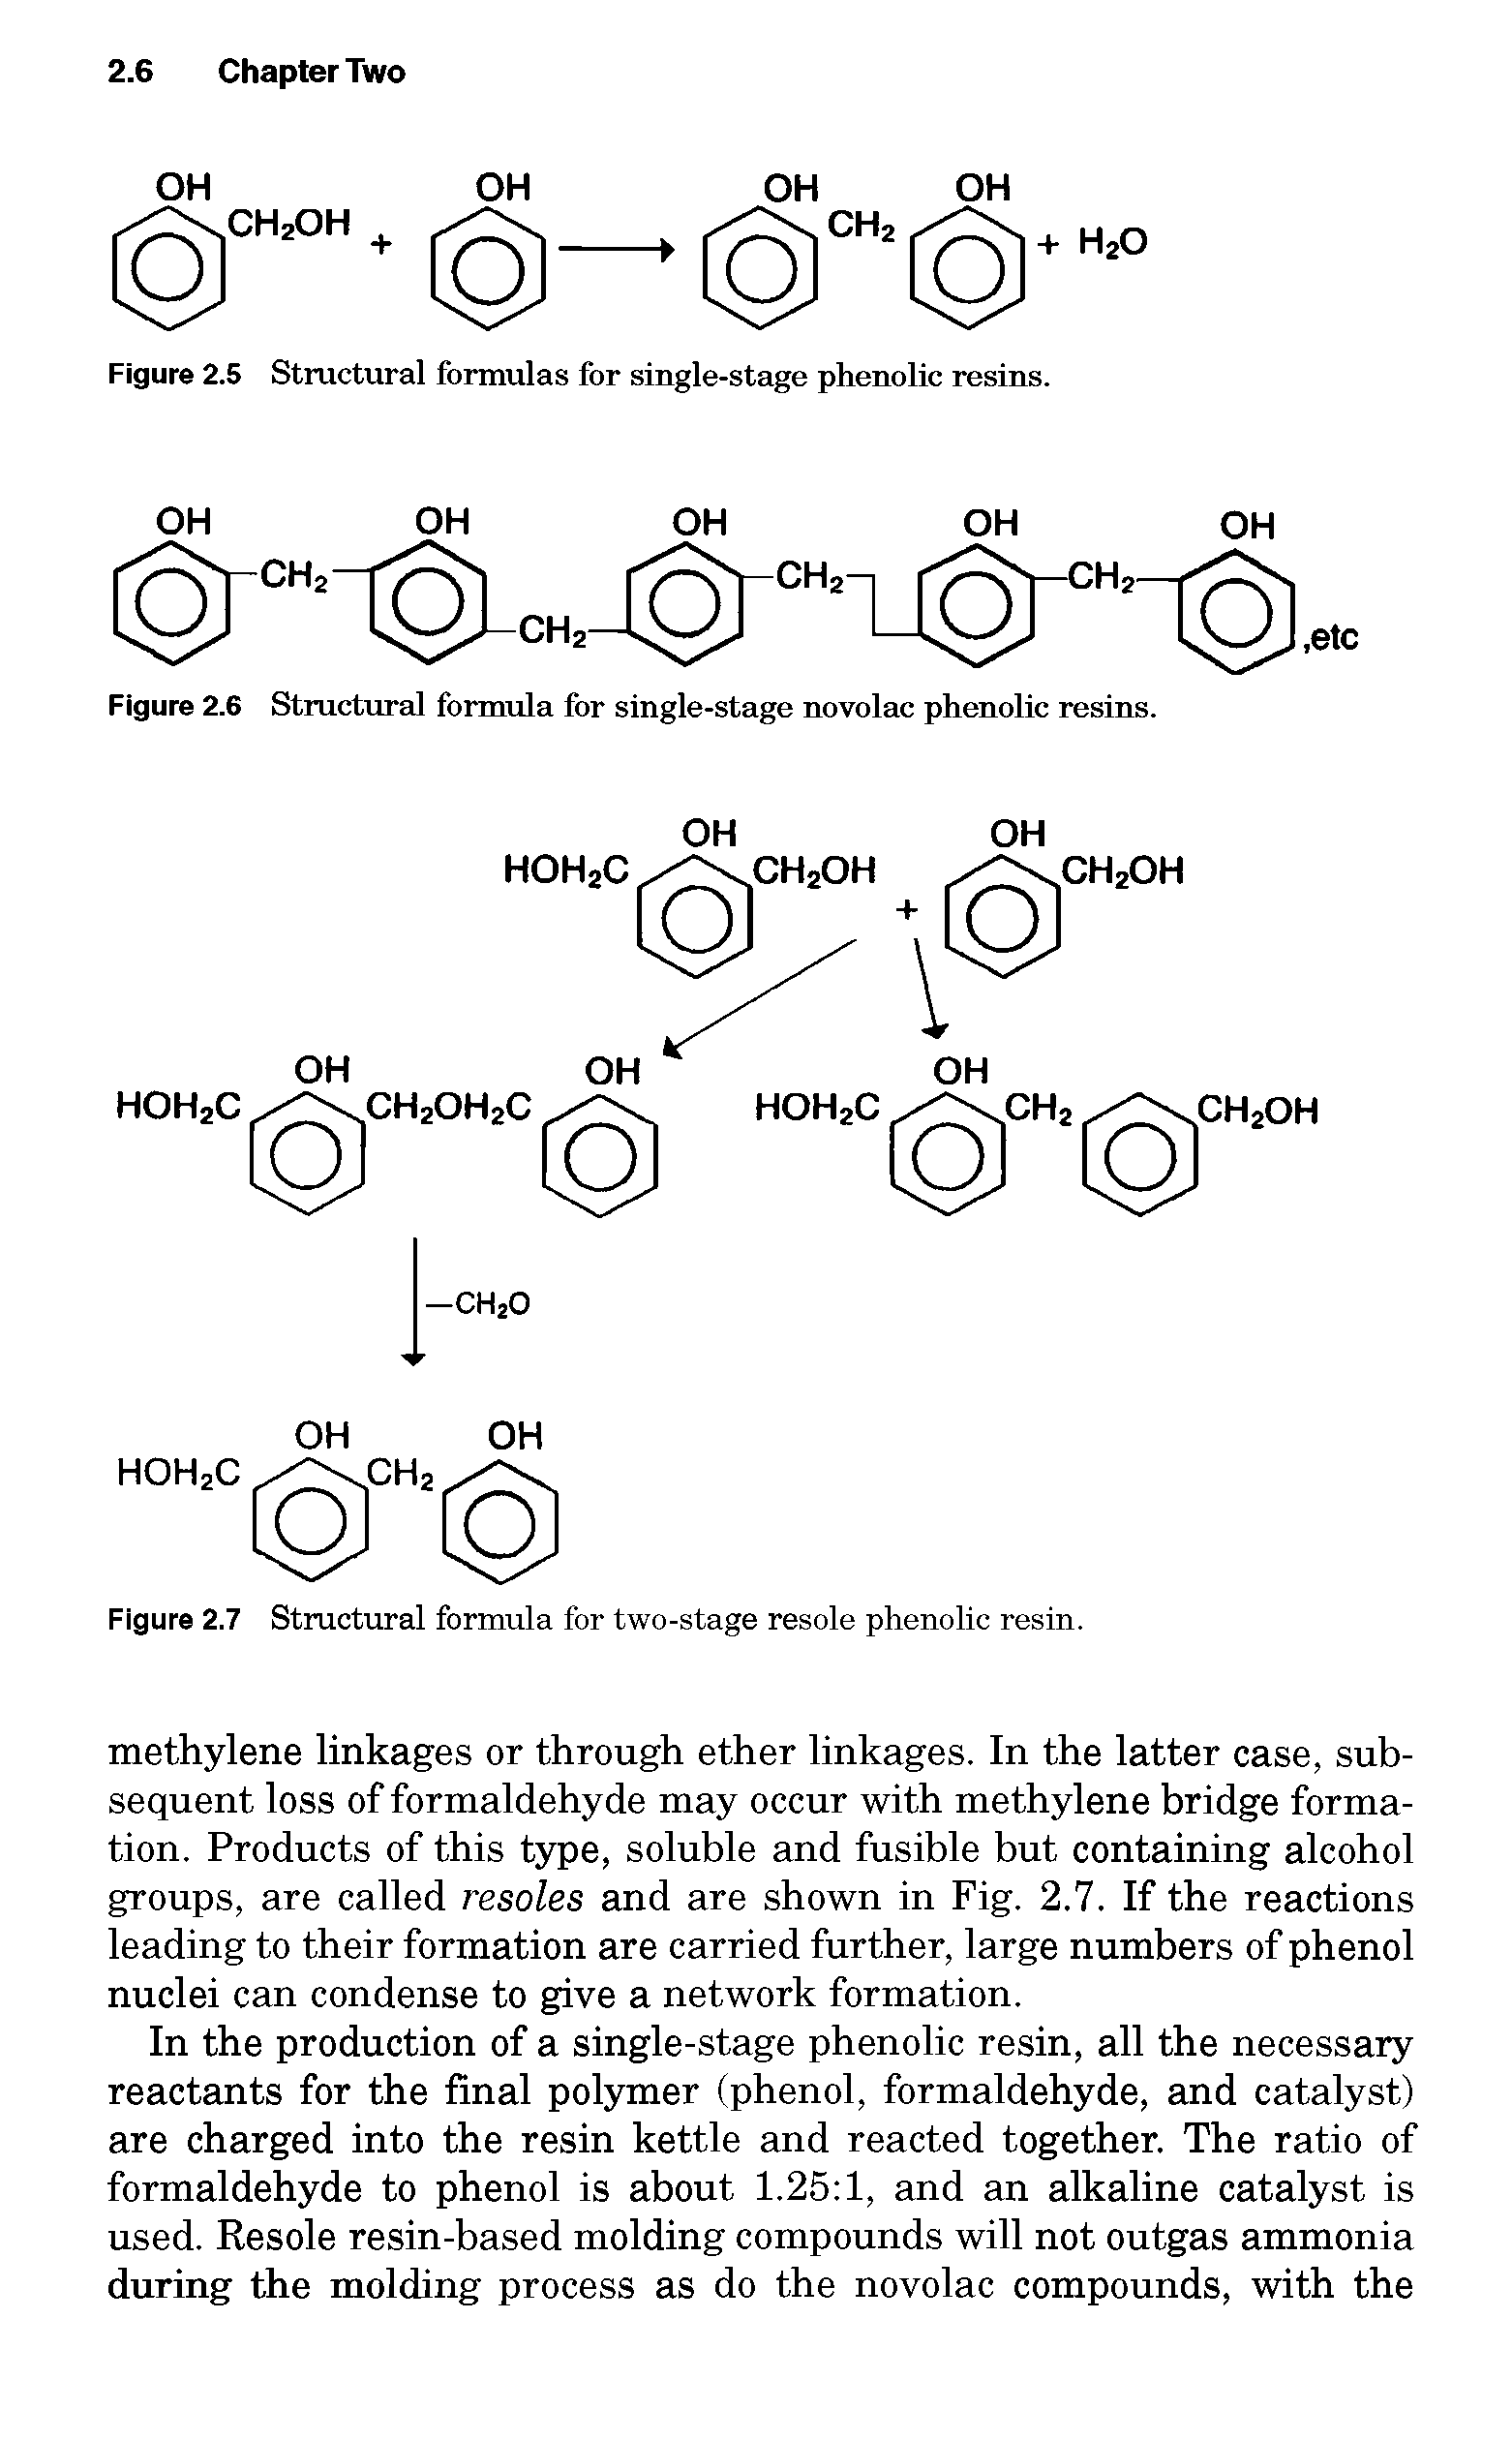 Figure 2.6 Structural formula for single-stage novolac phenolic resins.